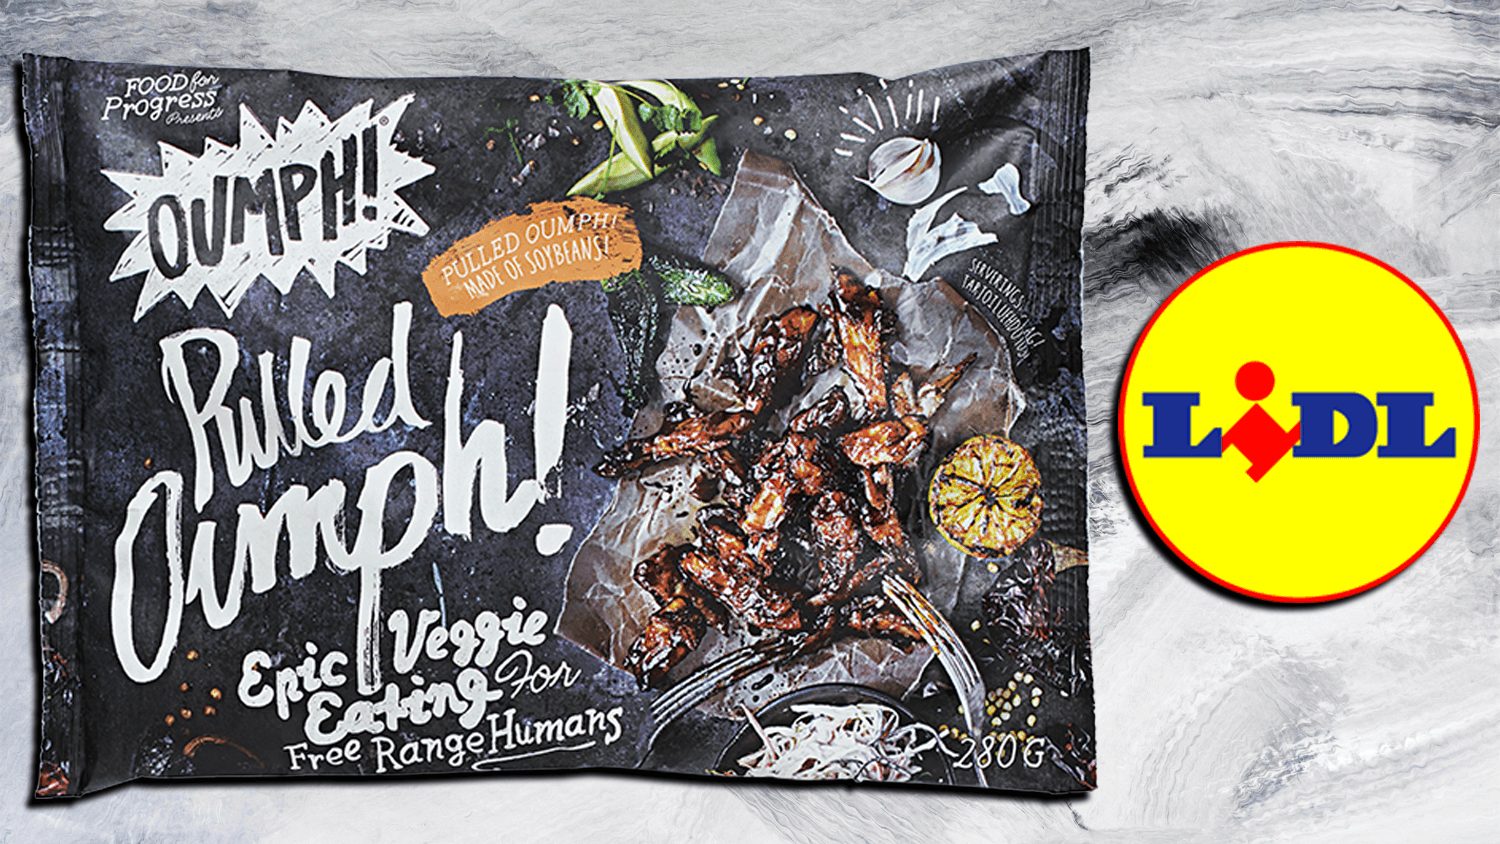 Vegan Brand Oumph! To Launch in Lidl Sweden